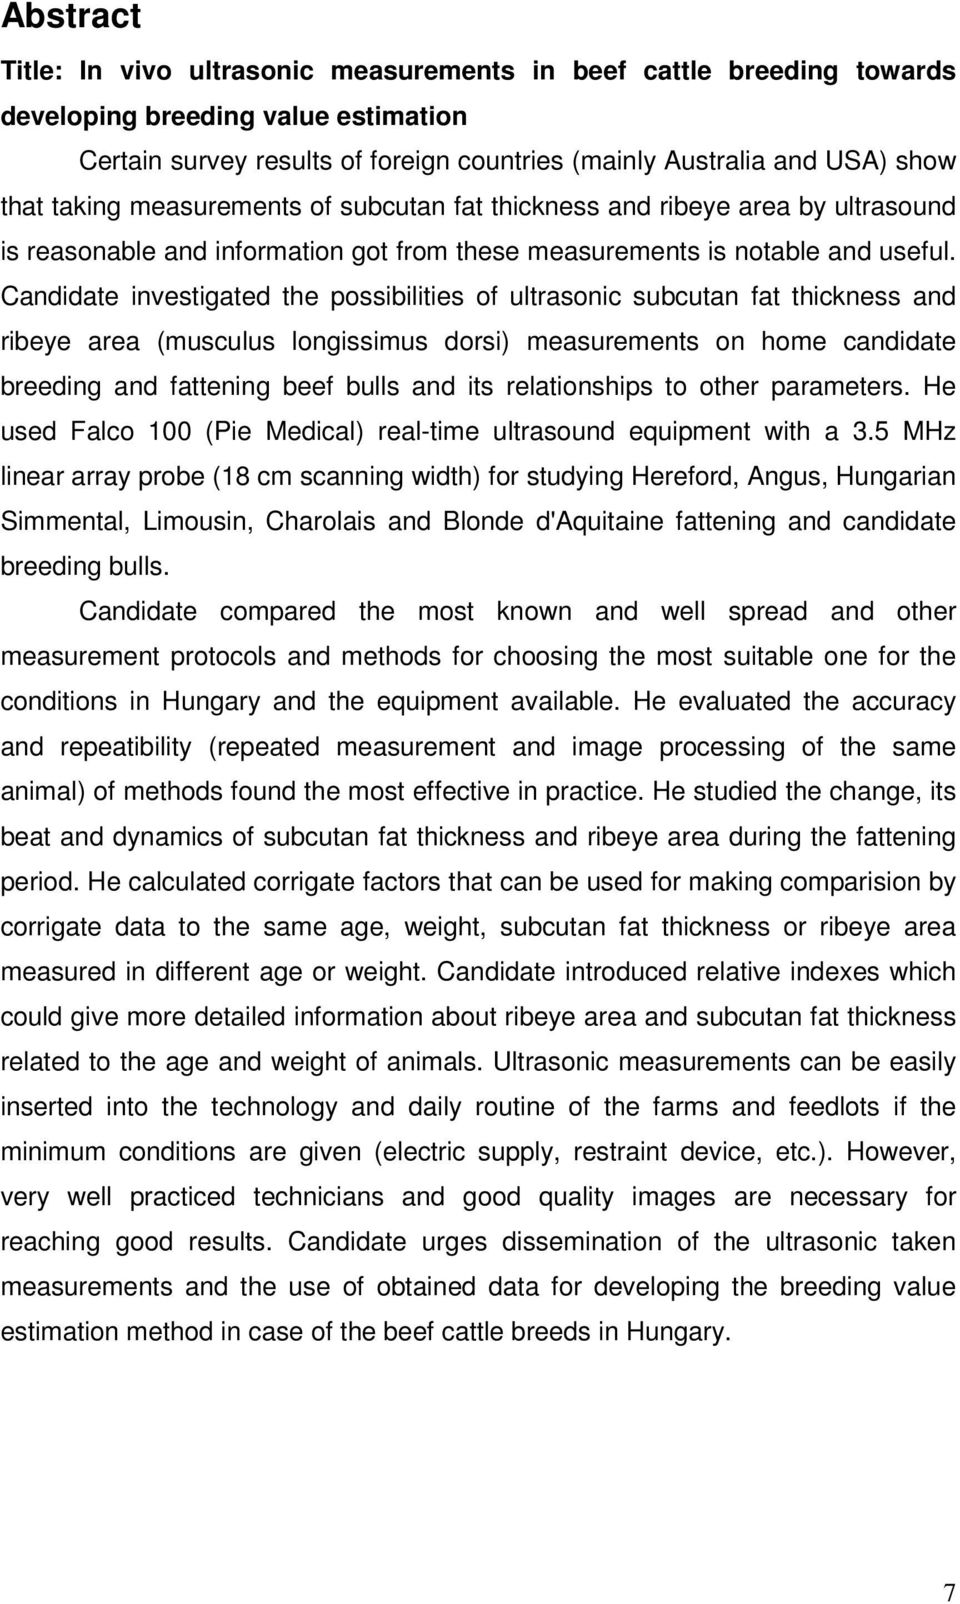 Candidate investigated the possibilities of ultrasonic subcutan fat thickness and ribeye area (musculus longissimus dorsi) measurements on home candidate breeding and fattening beef bulls and its